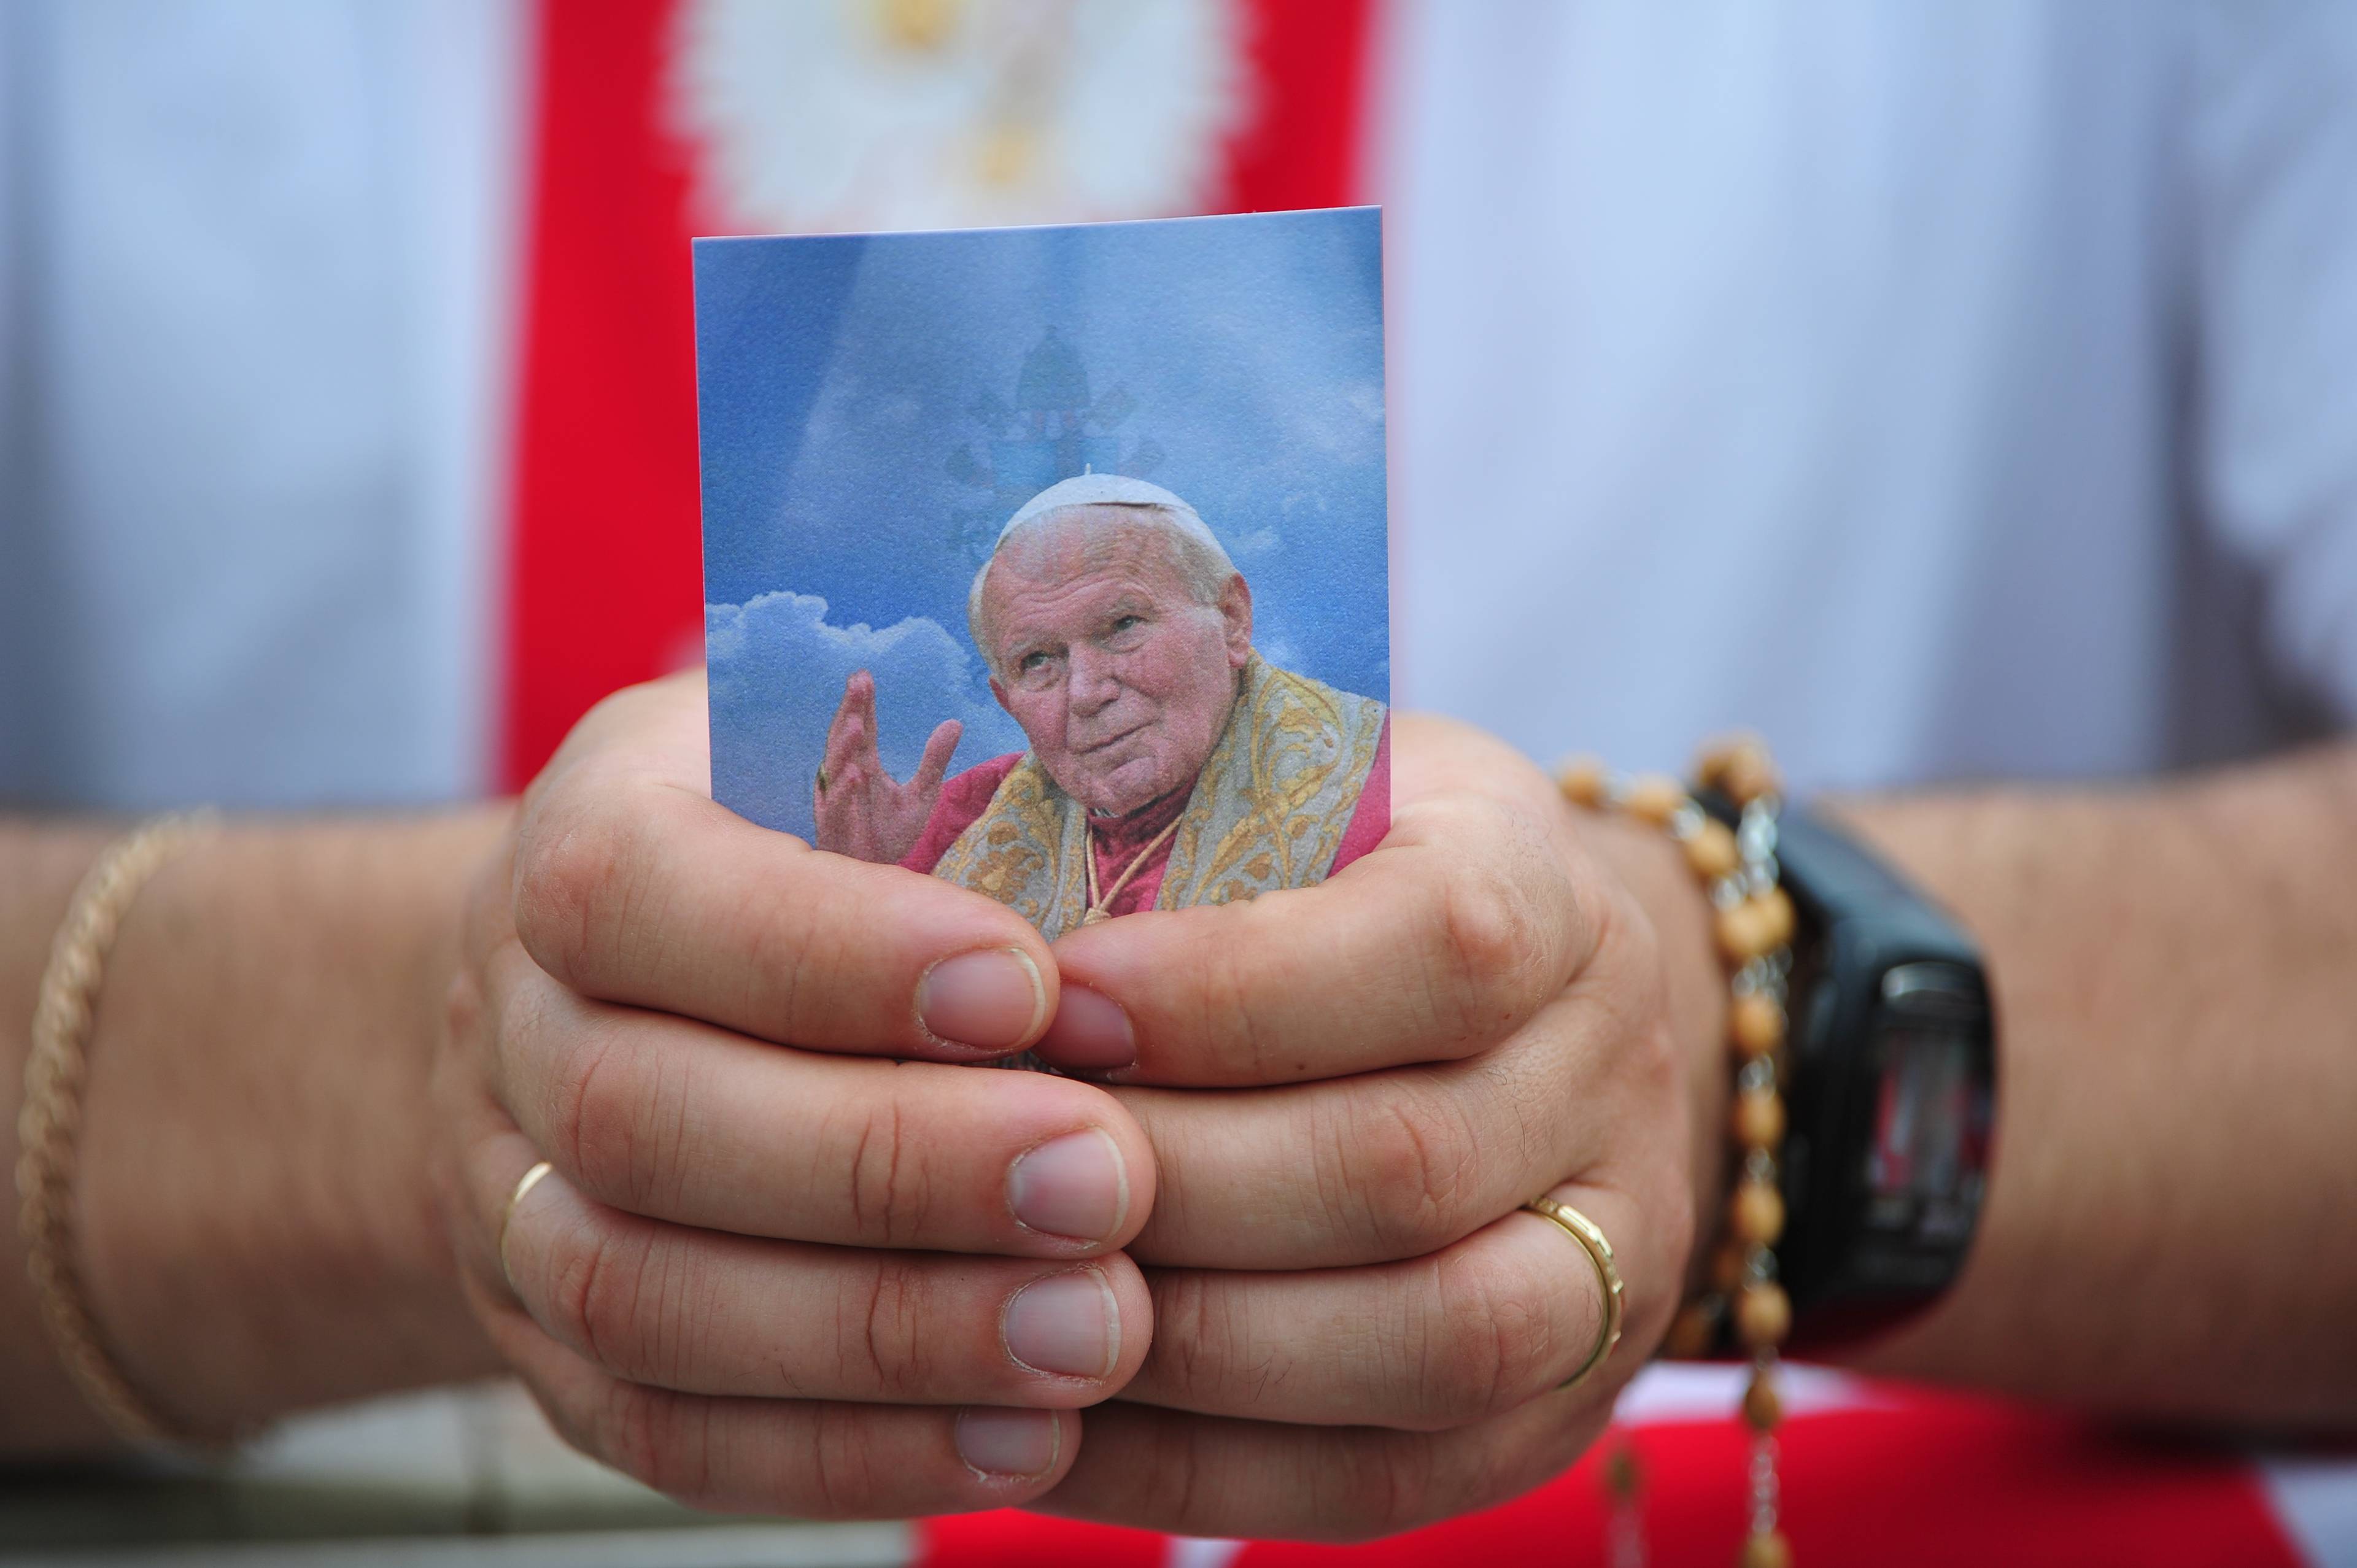 A Pilgrim holds a photo of the late Pope John Paul II while attending a mass of thanksgiving led by Vatican Secretary of State Tarcisio Bertone in Saint Peter's Square  in the Vatican on May 2, 2011. A giant banner bearing a smiling portrait of the charismatic Polish pope was unveiled over the facade of Saint Peter's Basilica Sunday after Benedict pronounced the formula of beatification just six years after John Paul's death. AFP PHOTO/ALBERTO PIZZOLI (Photo by ALBERTO PIZZOLI / AFP)